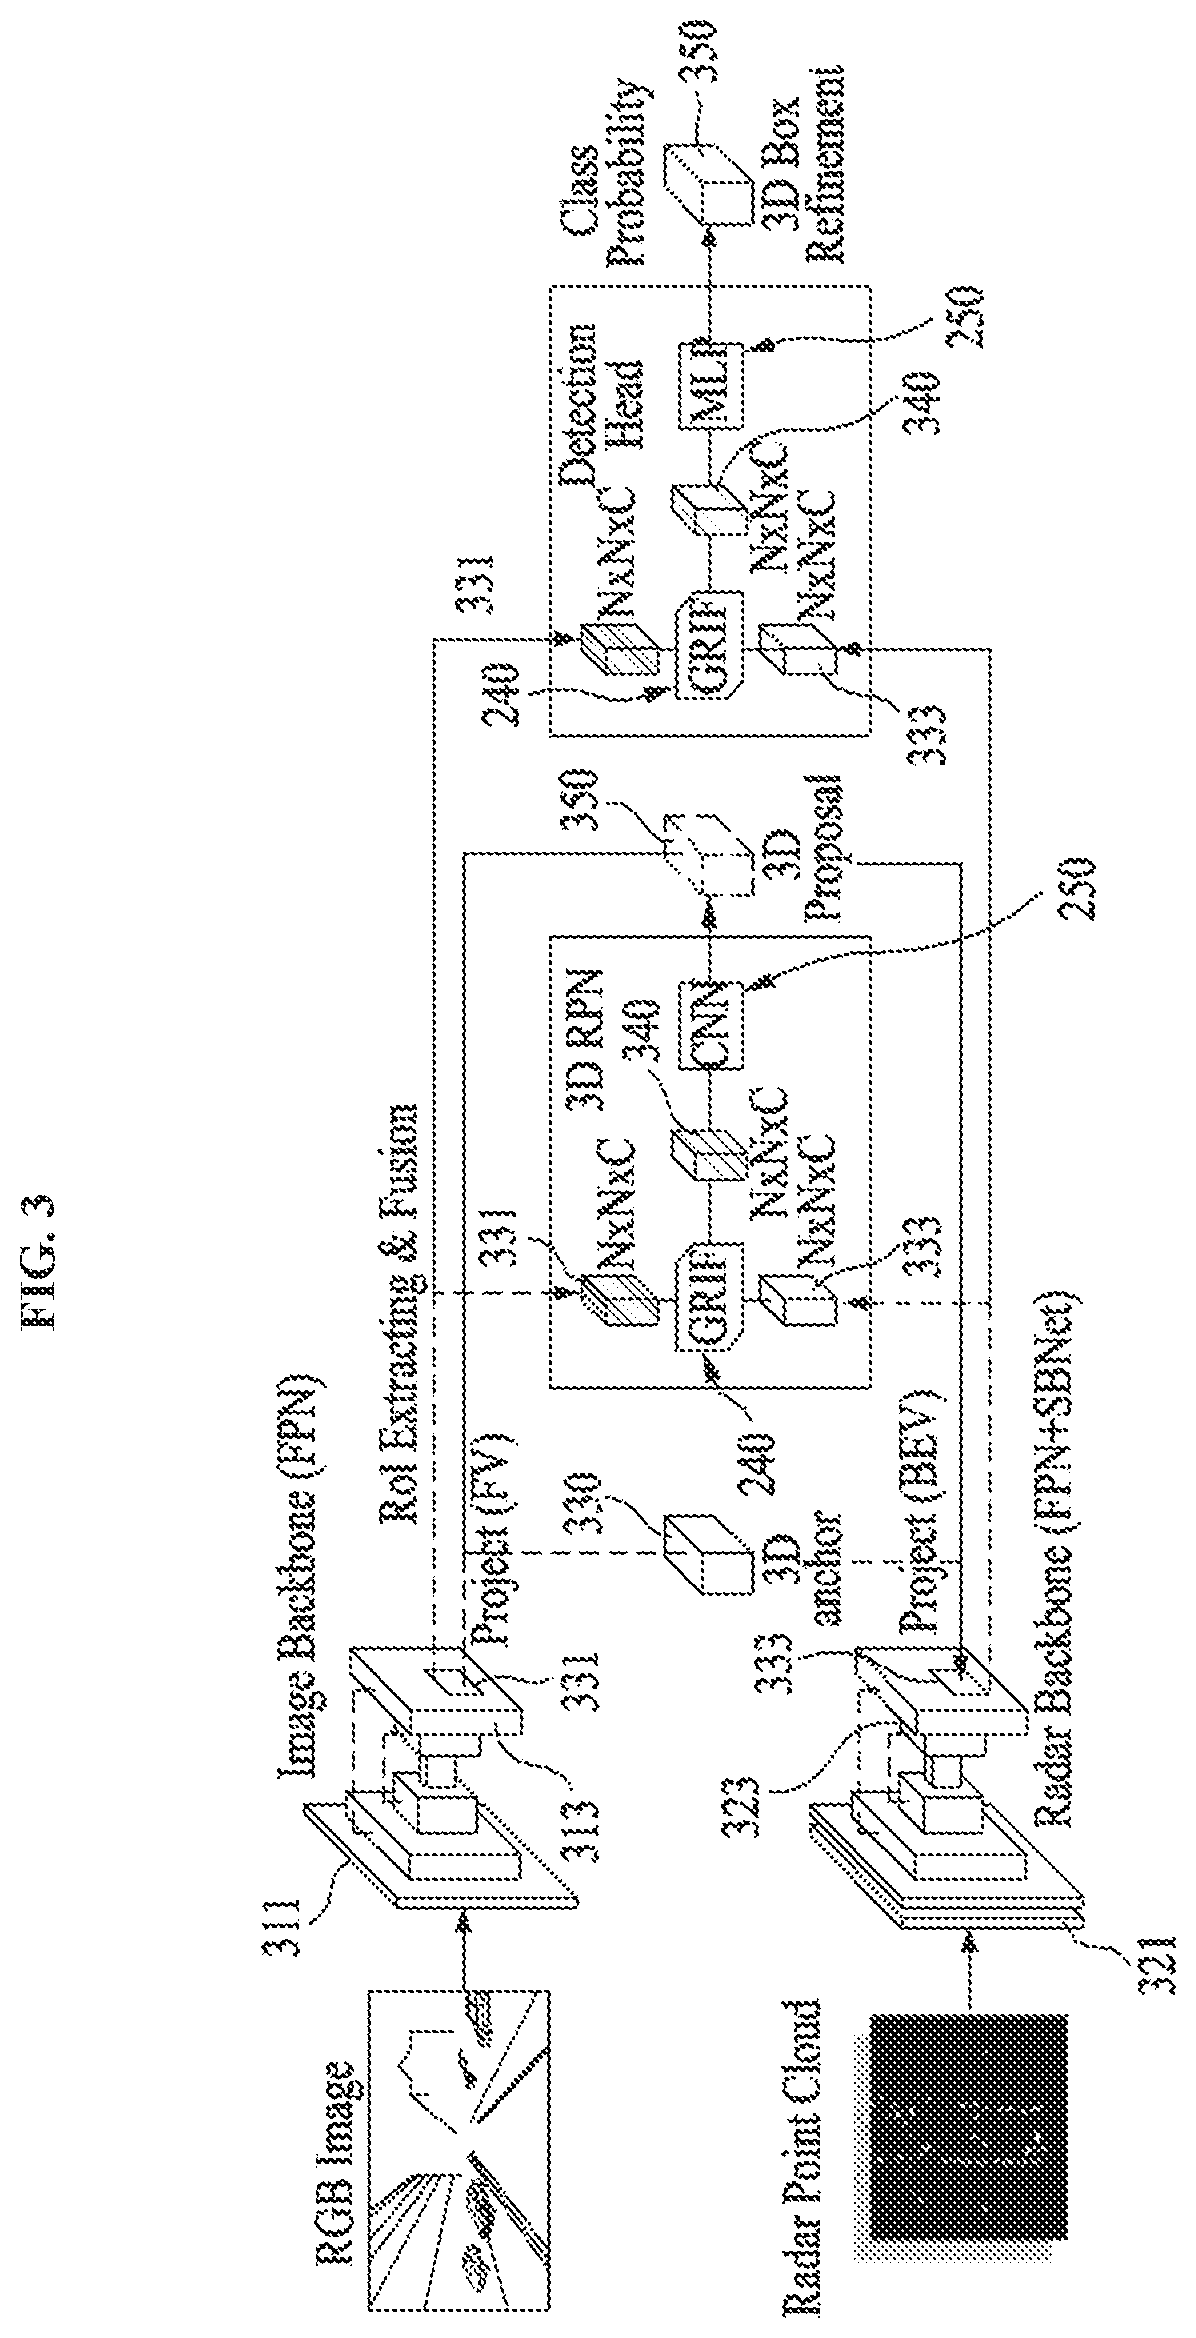 Electronic device for camera and radar sensor fusion-based three-dimensional object detection and operating method thereof